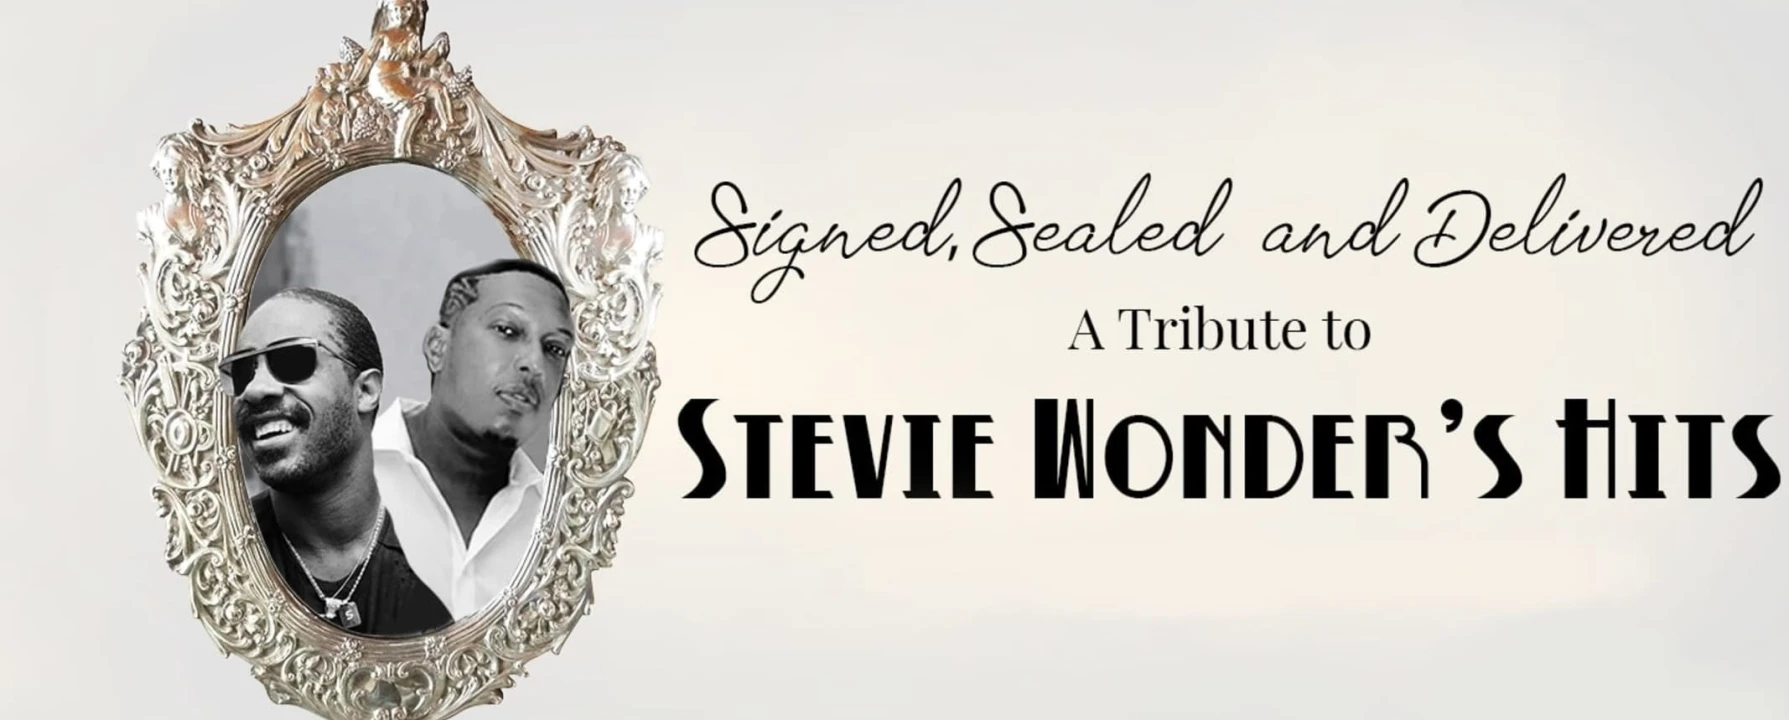 Signed, Sealed, and Delivered: A Tribute to Stevie Wonder: What to expect - 1